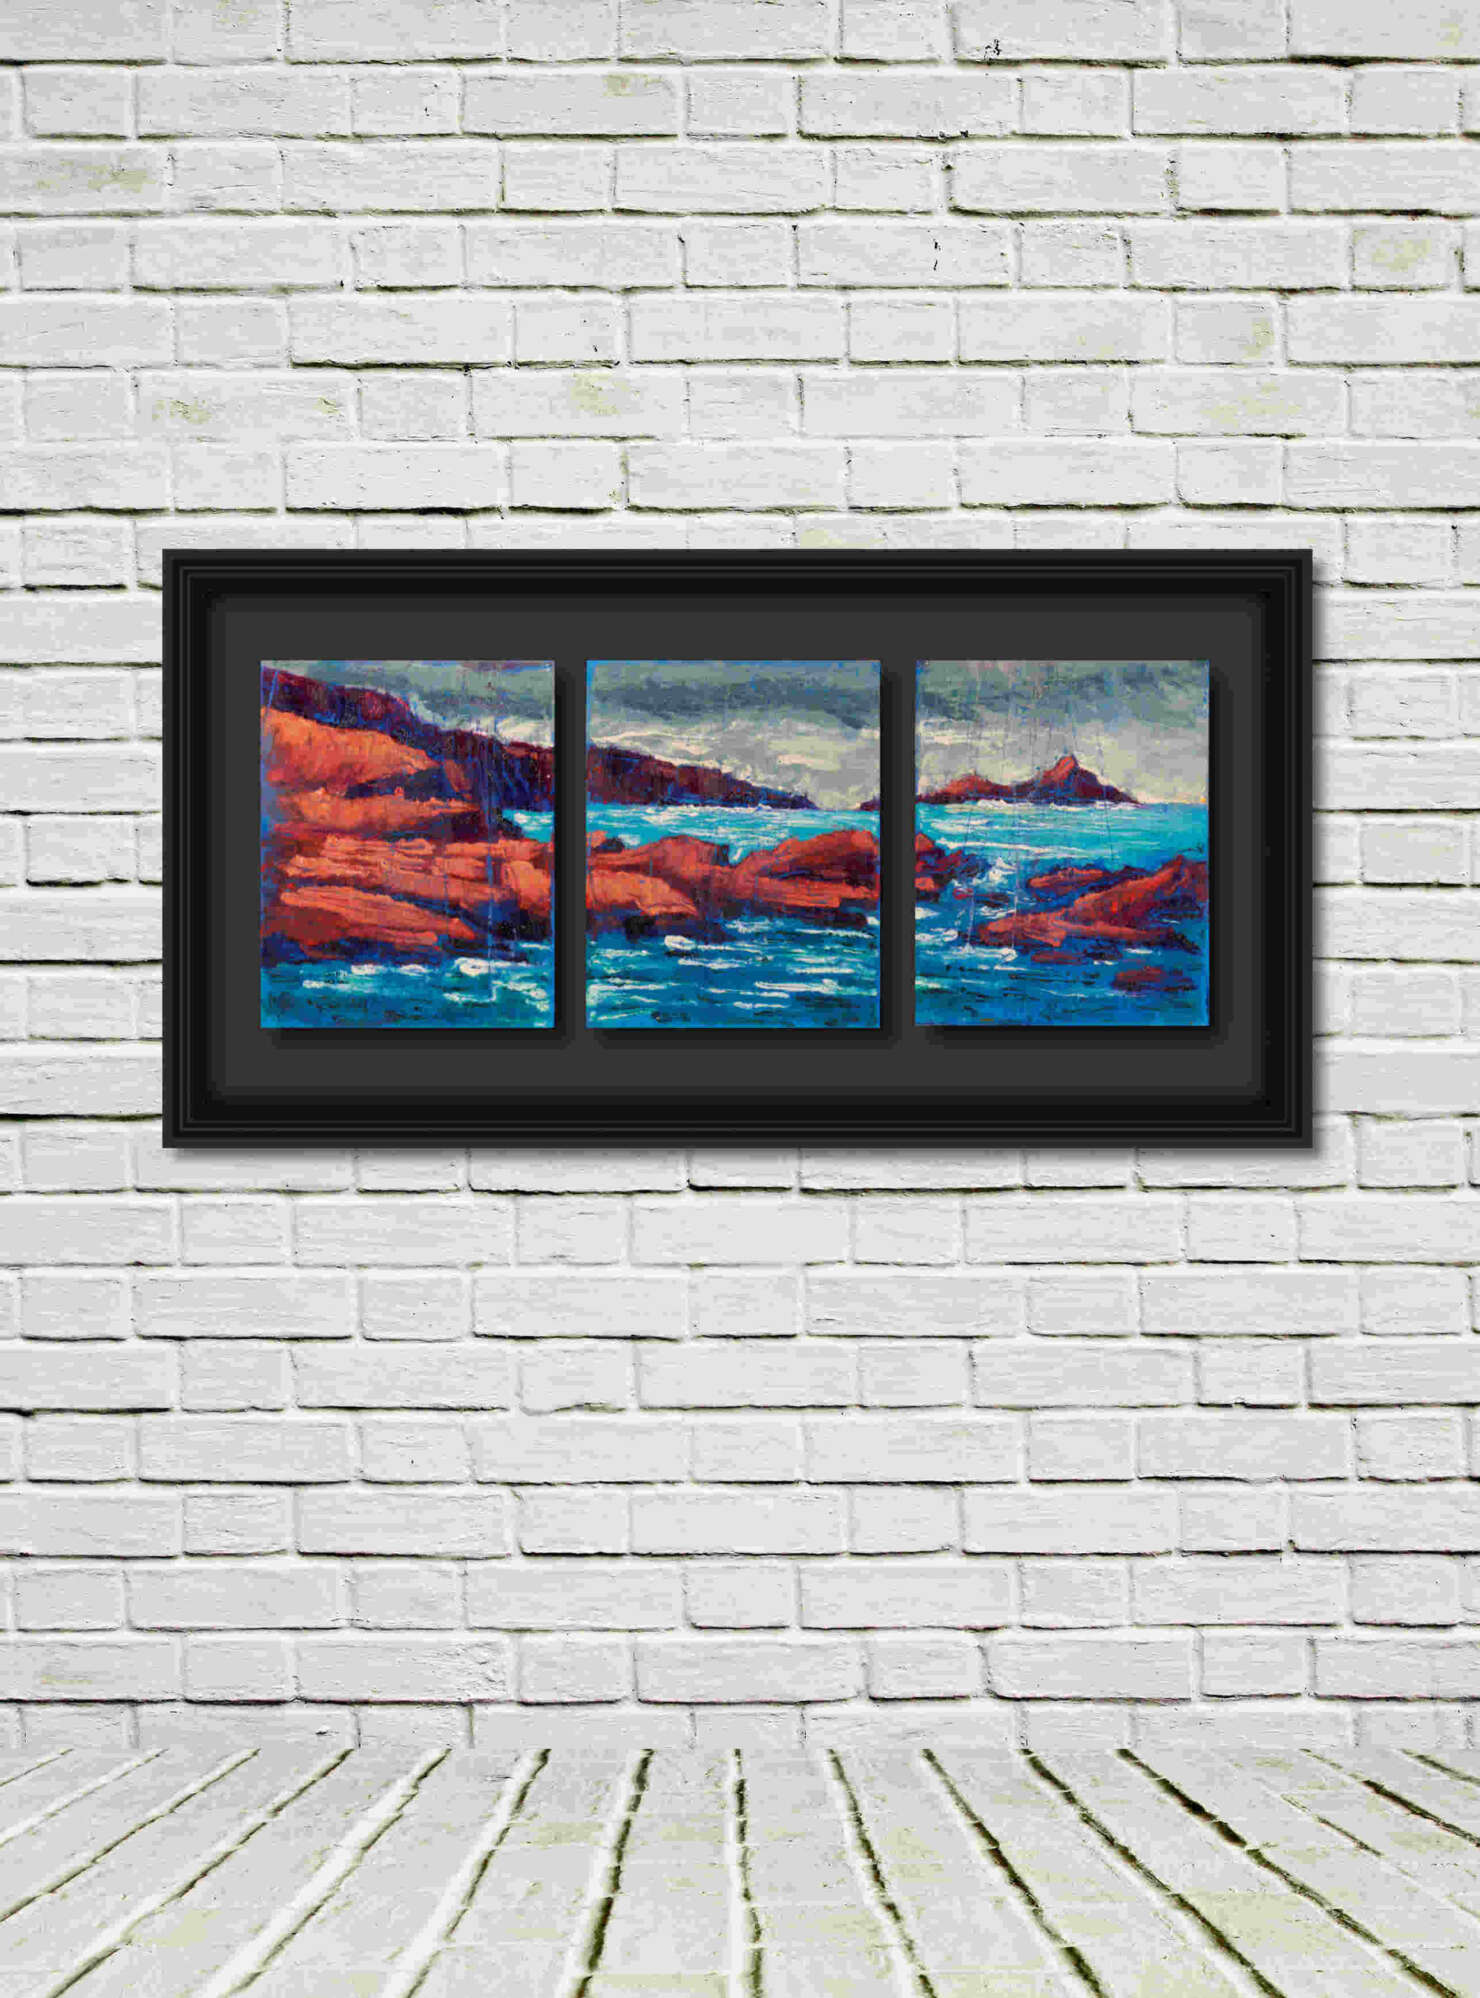 Artist Rod Coyne's triptych "Puffin Sound" is shown here, black framed triptych in a white room.